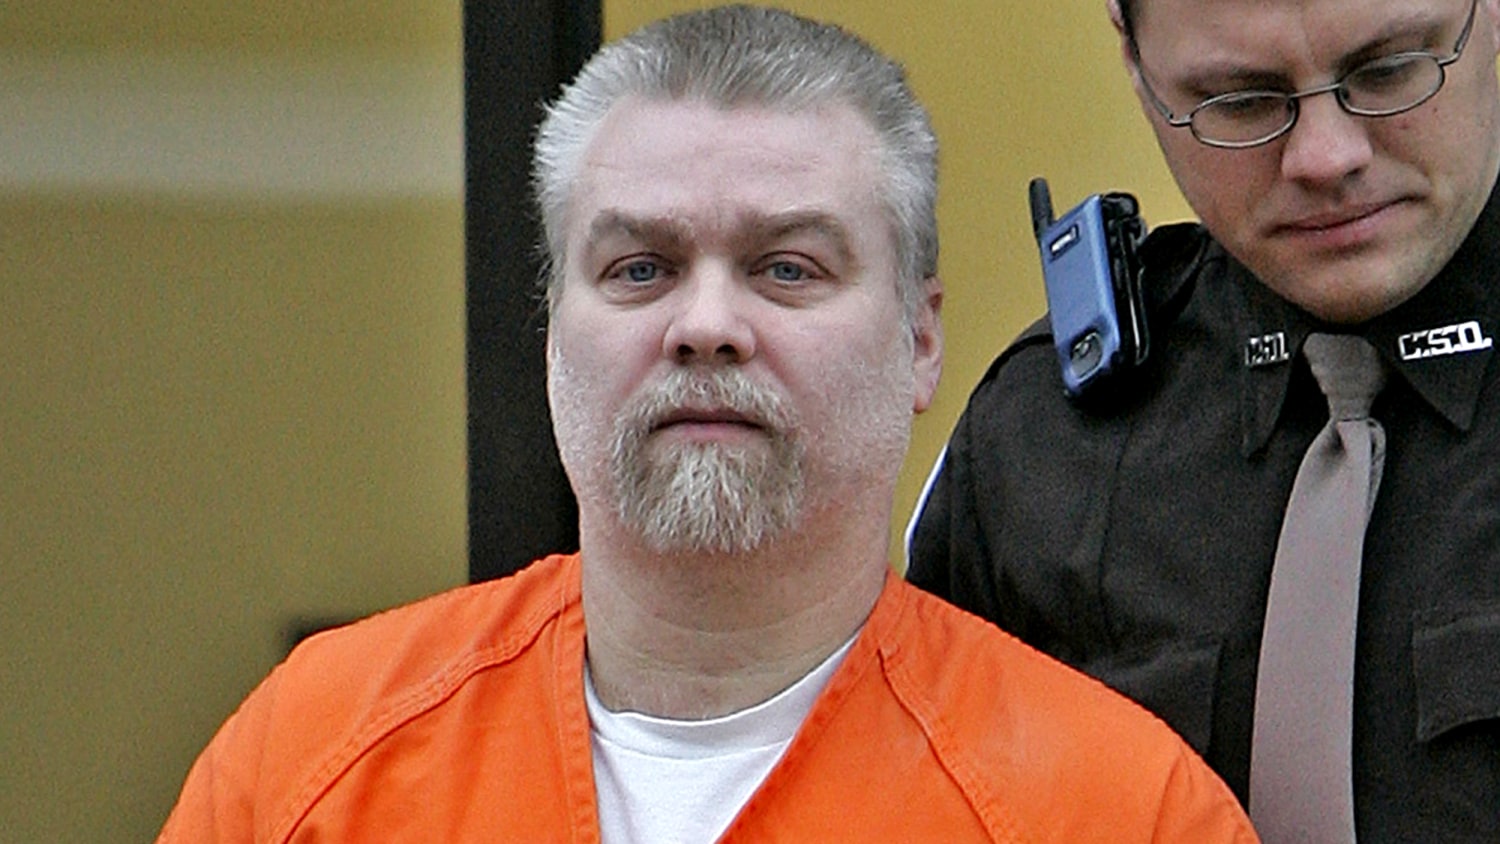 Steven Avery prosecutor rips 'Making a Murderer' in his new book